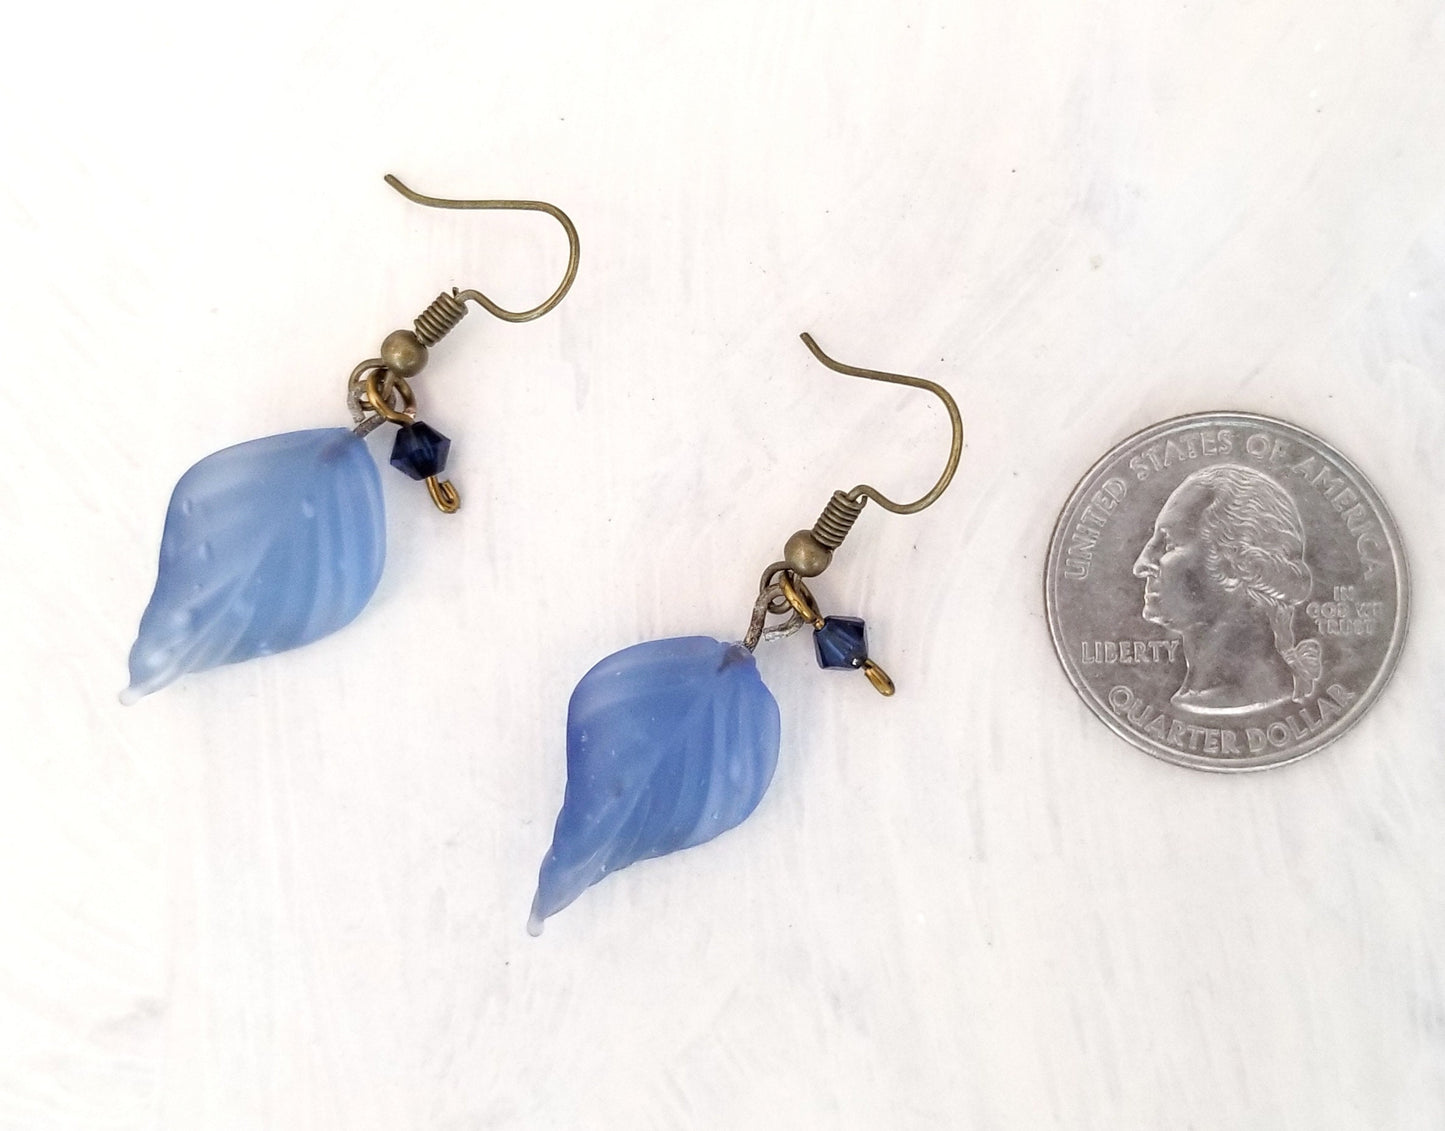 Long Glass Leaf Earrings in Frosted Blue, Wedding, Bridesmaid, Art Nouveau, Renaissance, Belle Epoque, Forest, Choice of Closure Types